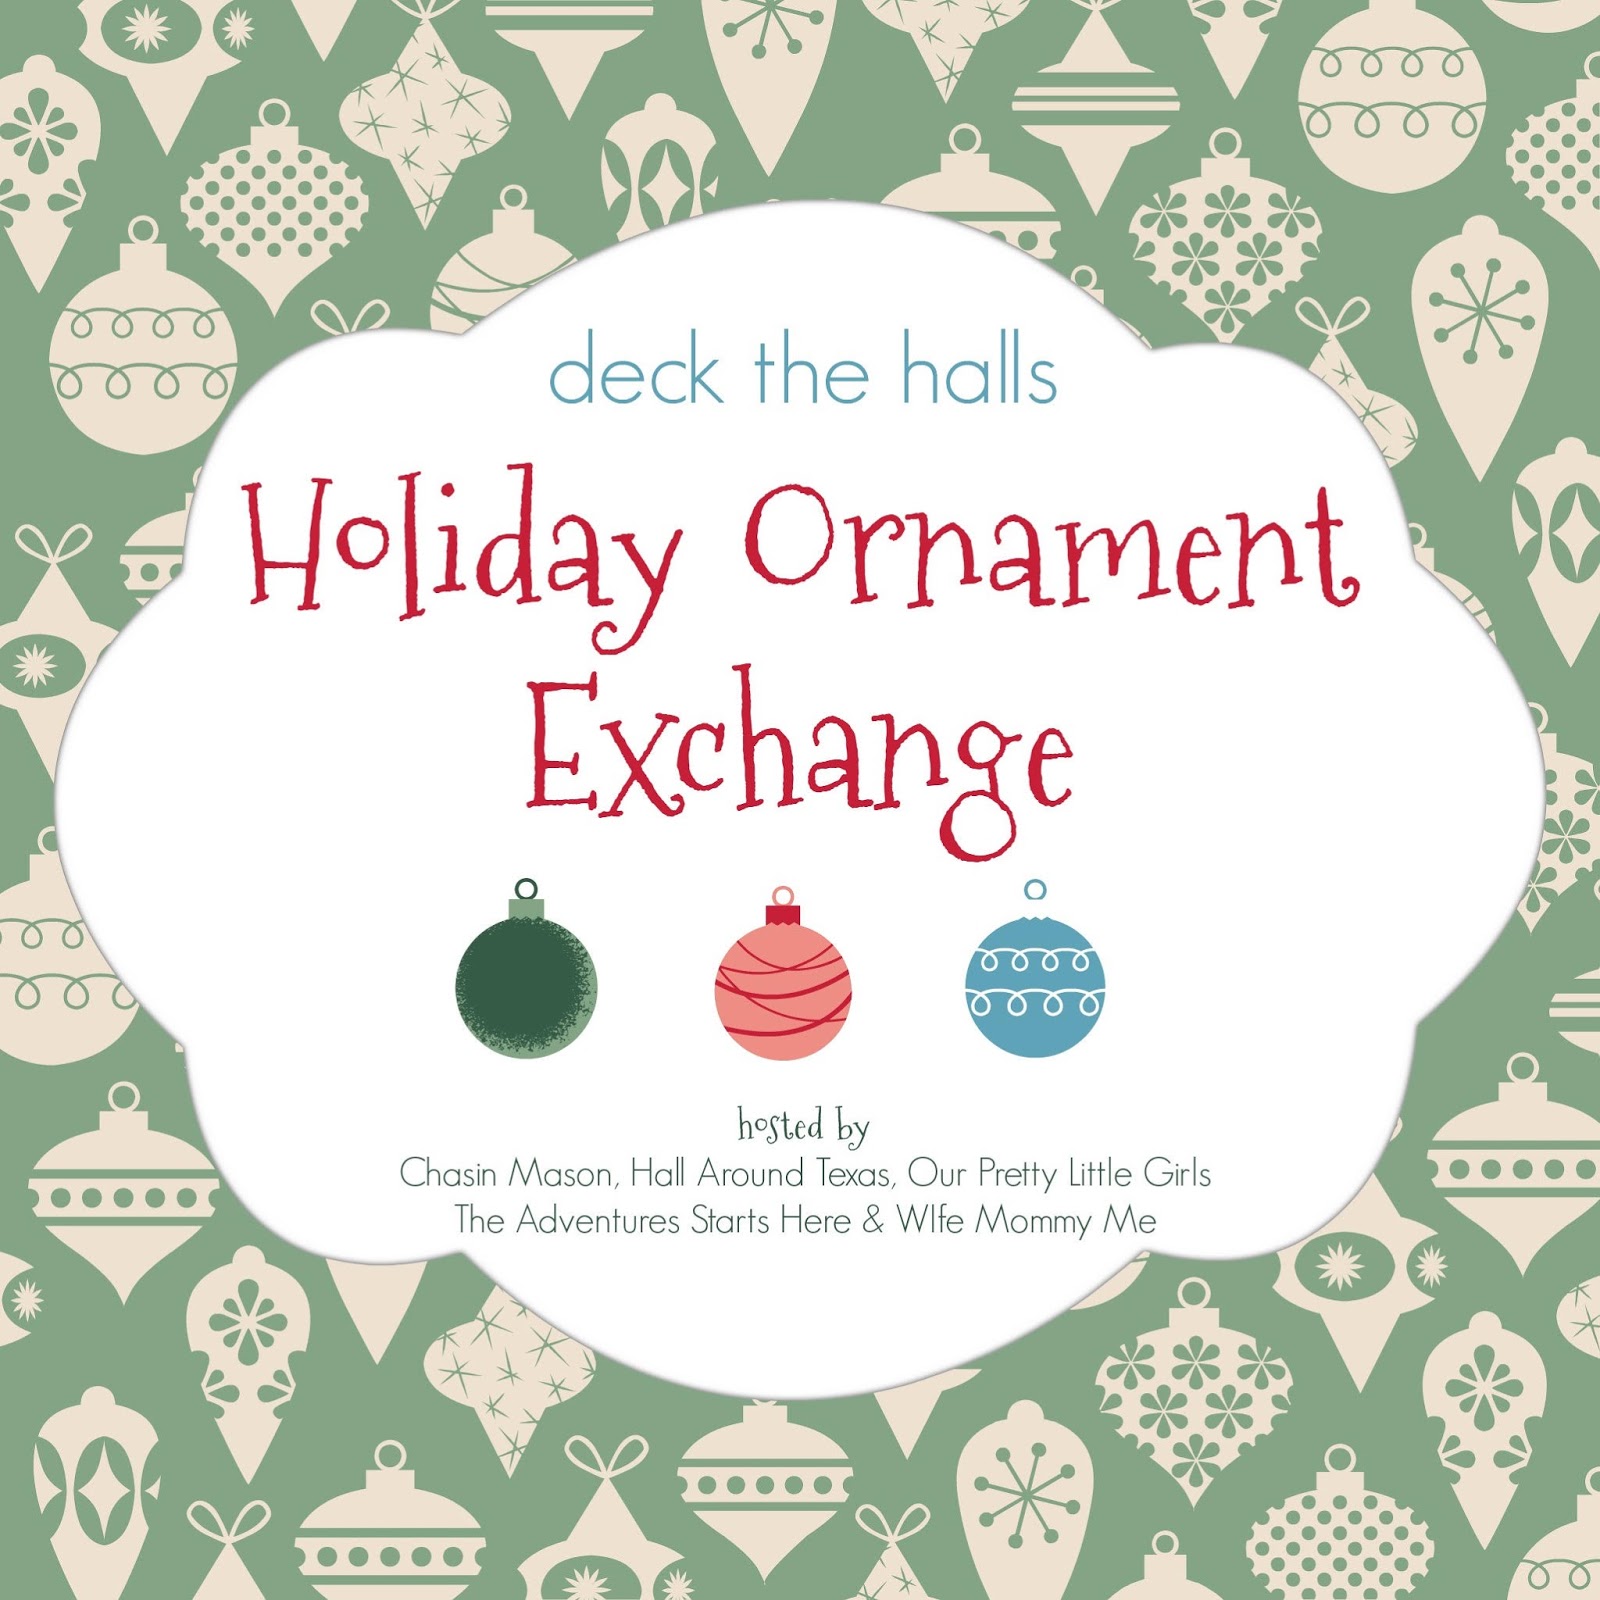 Chasin Mason Announcing A Holiday Ornament Exchange